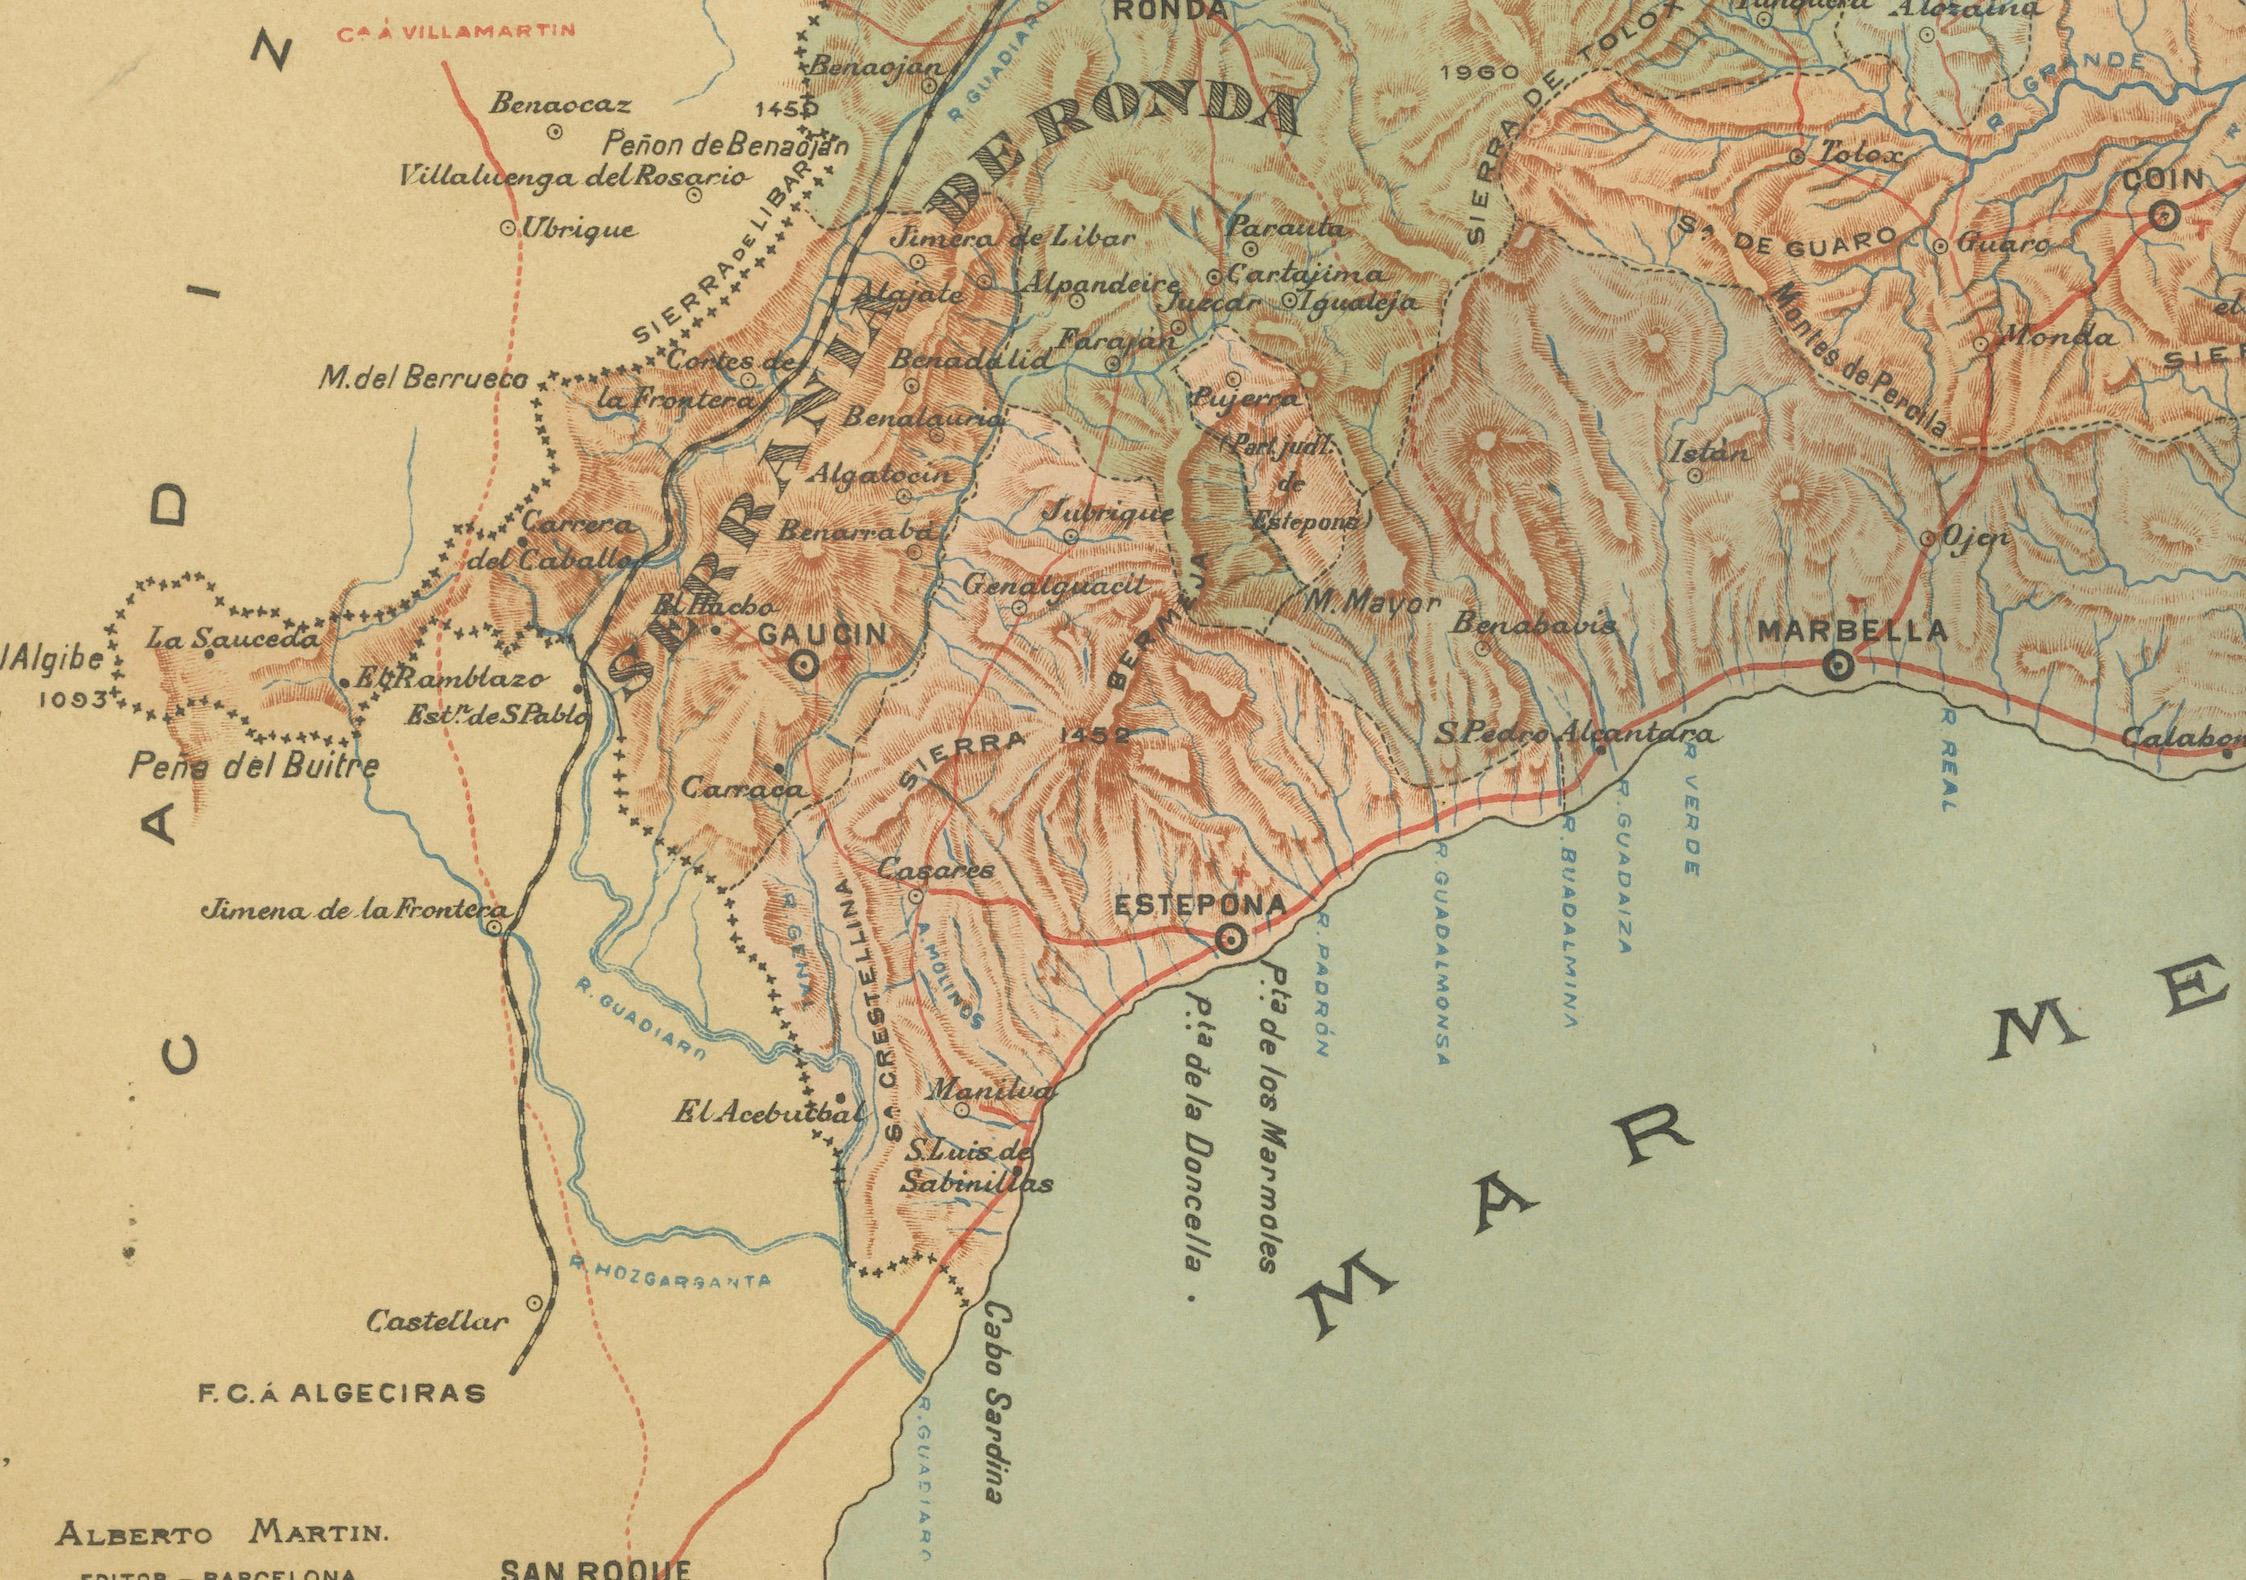 The map depicts the province of Málaga, located in the autonomous community of Andalusia in southern Spain, as it was in 1901. Here are the key features illustrated on the map:

- **Topography**: The map highlights the mountainous regions of Málaga,